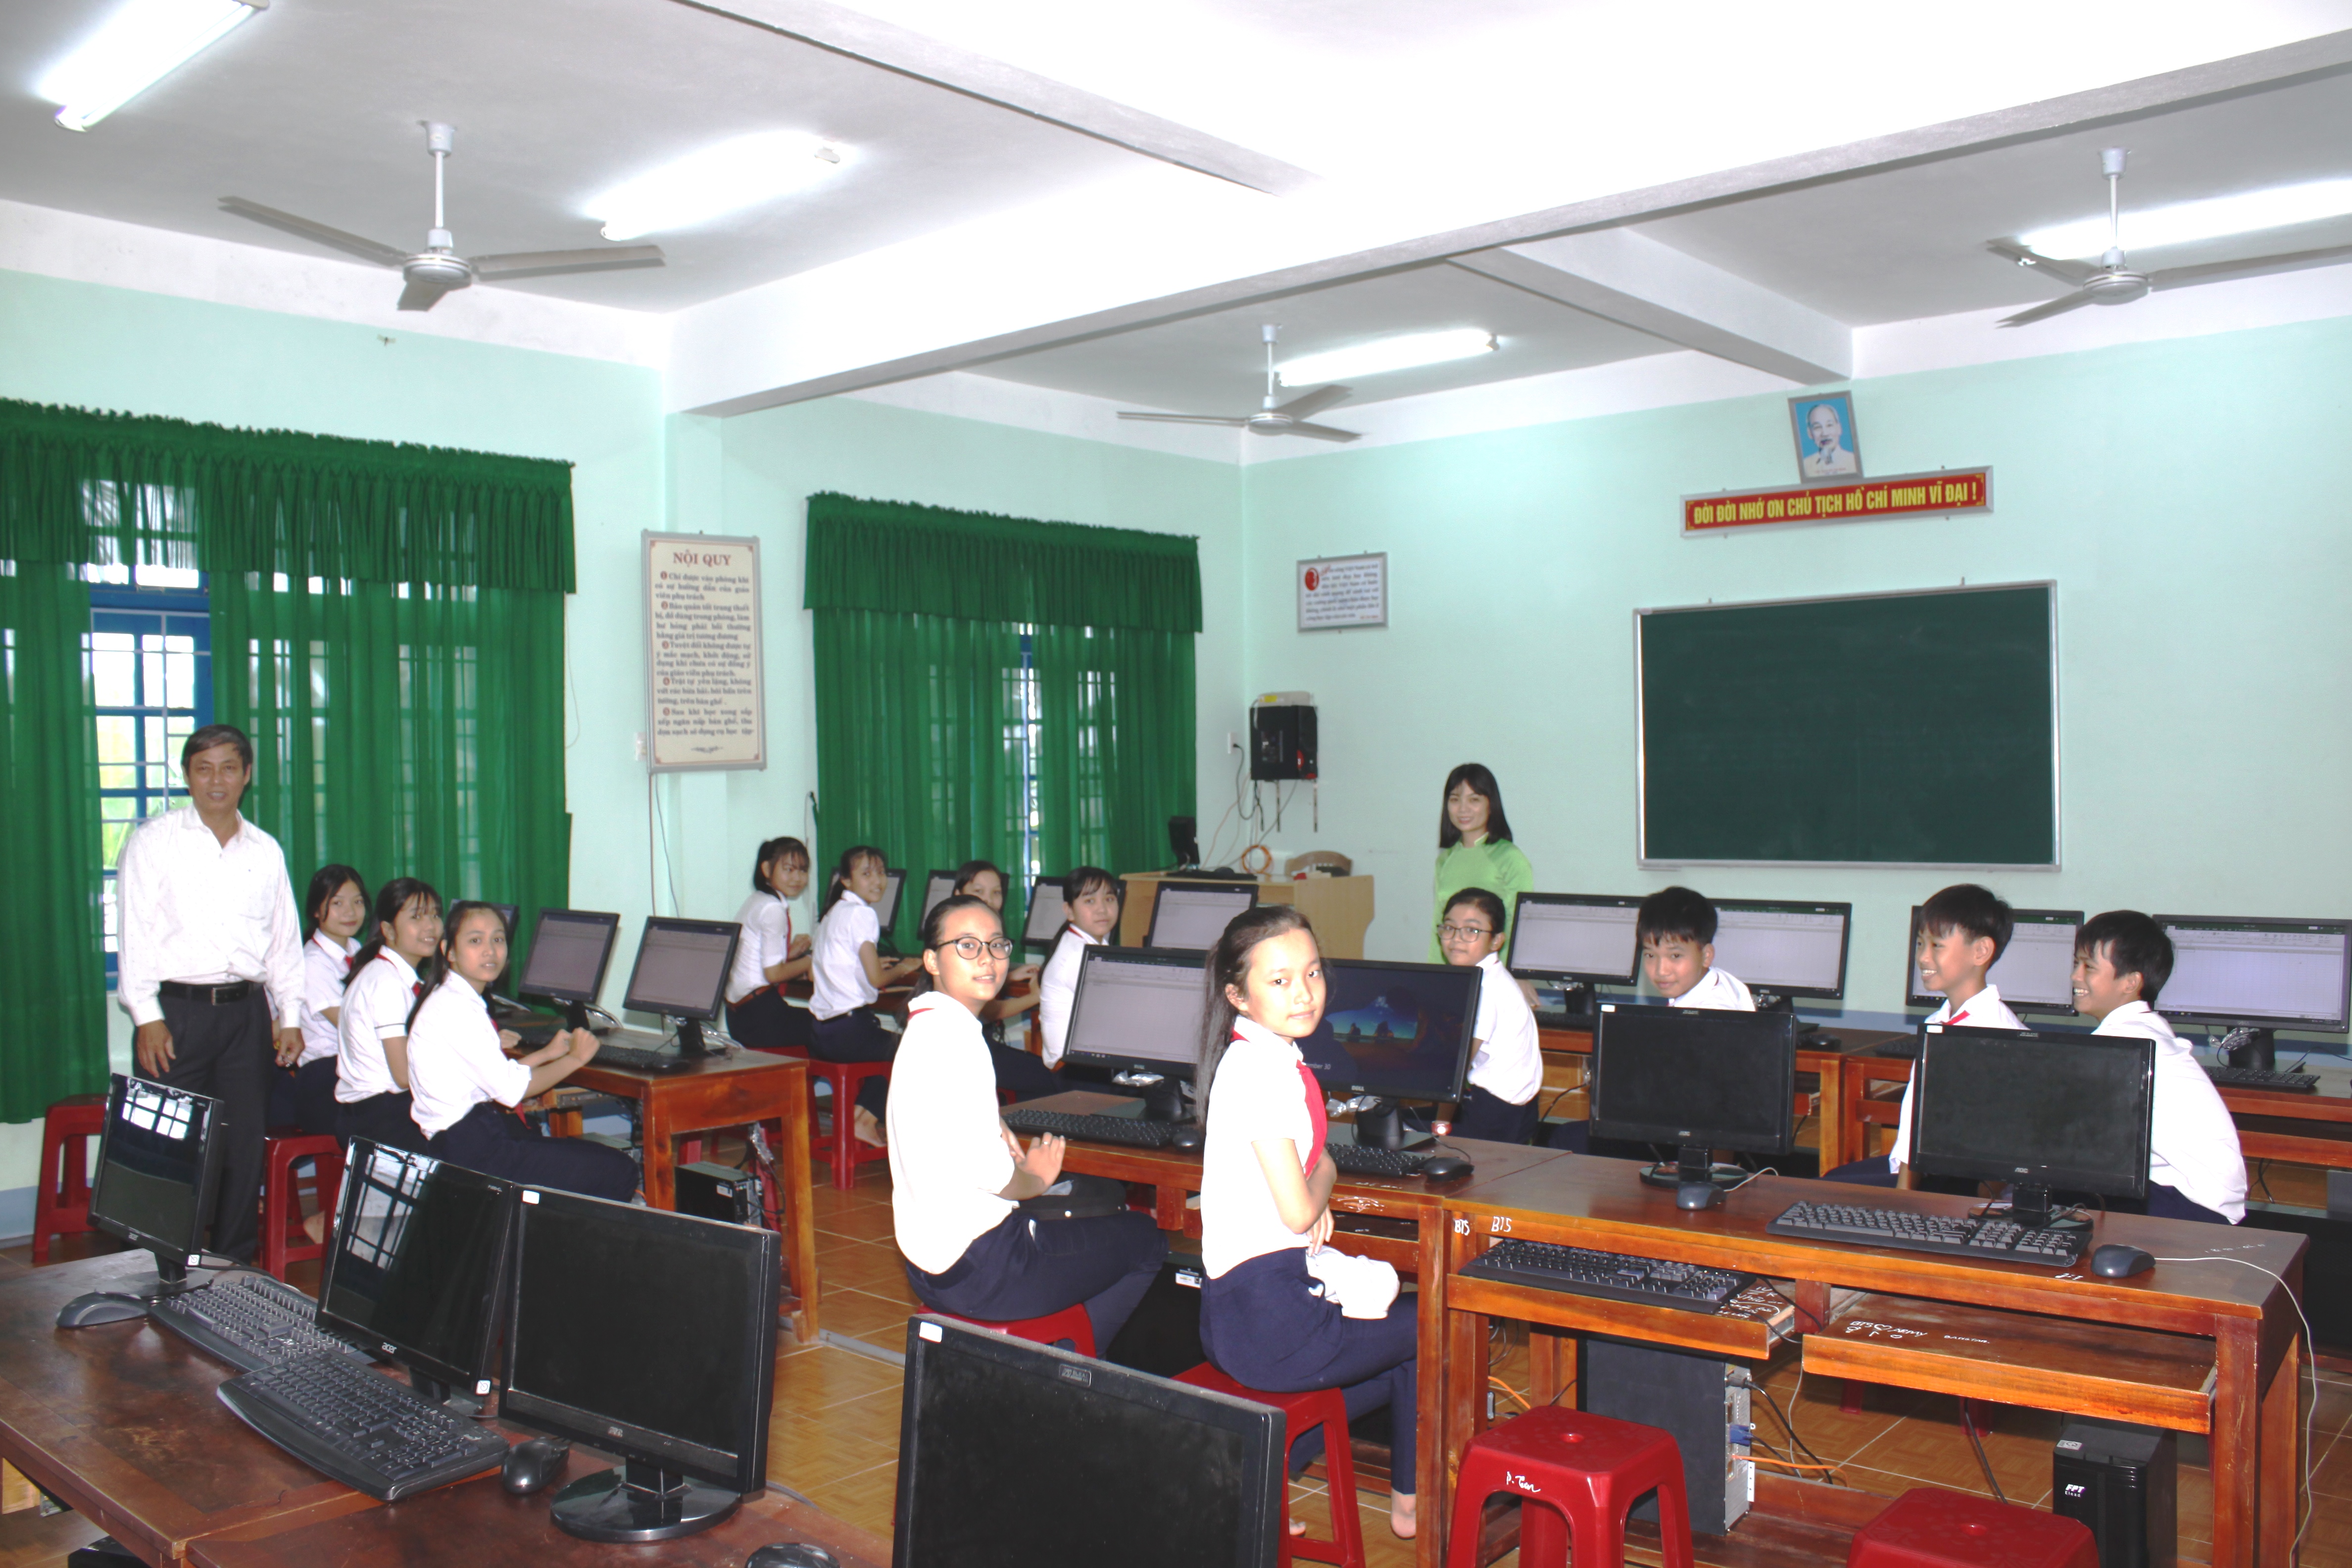 Students and staff at Tran Cao Van Secondary School Dien Ban are very happy with their new computer room.